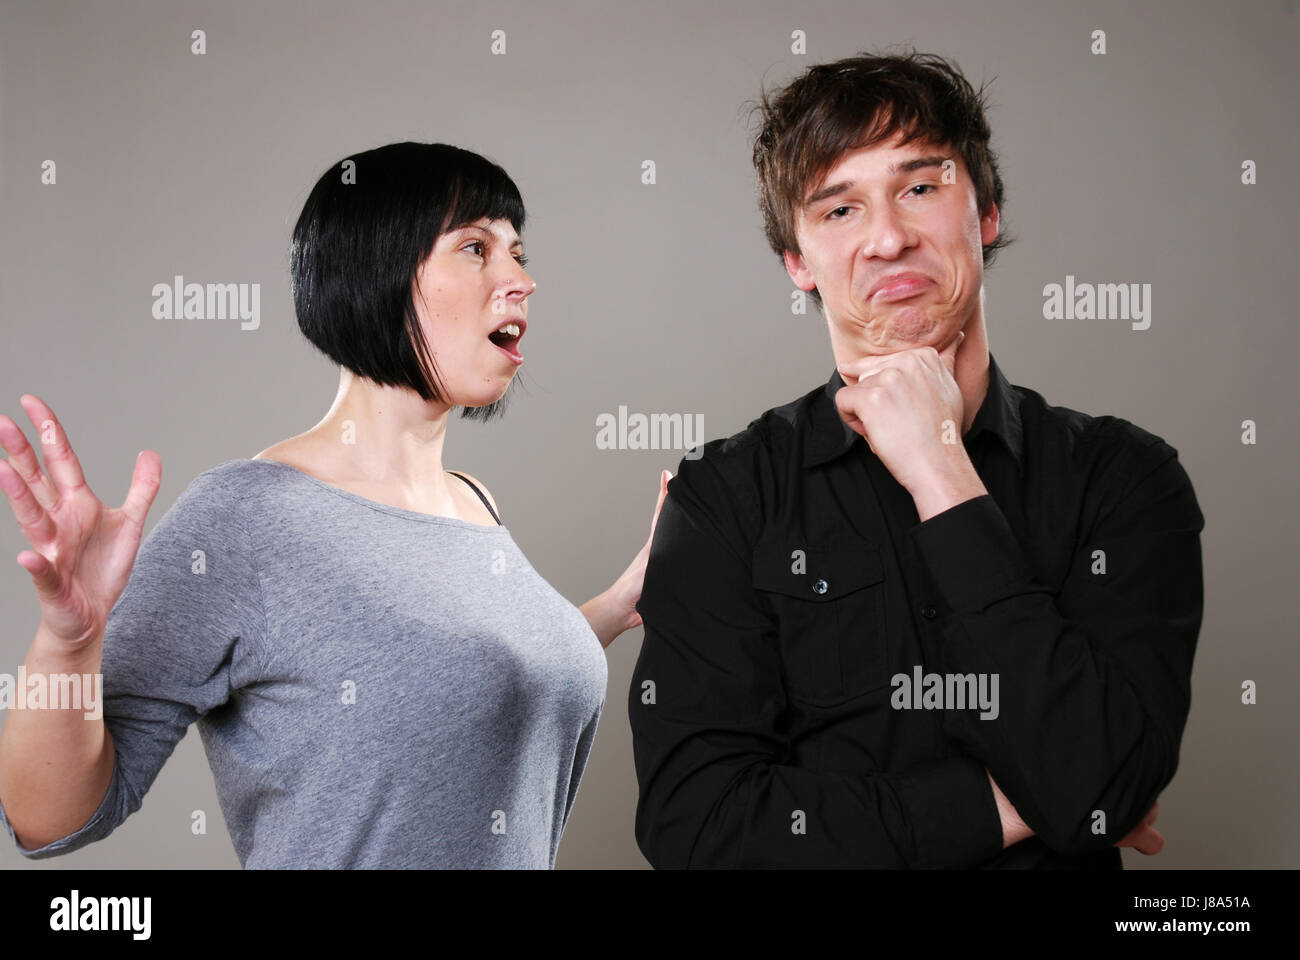 conflict, argue, problem, love, in love, fell in love, stress, couple, pair, Stock Photo